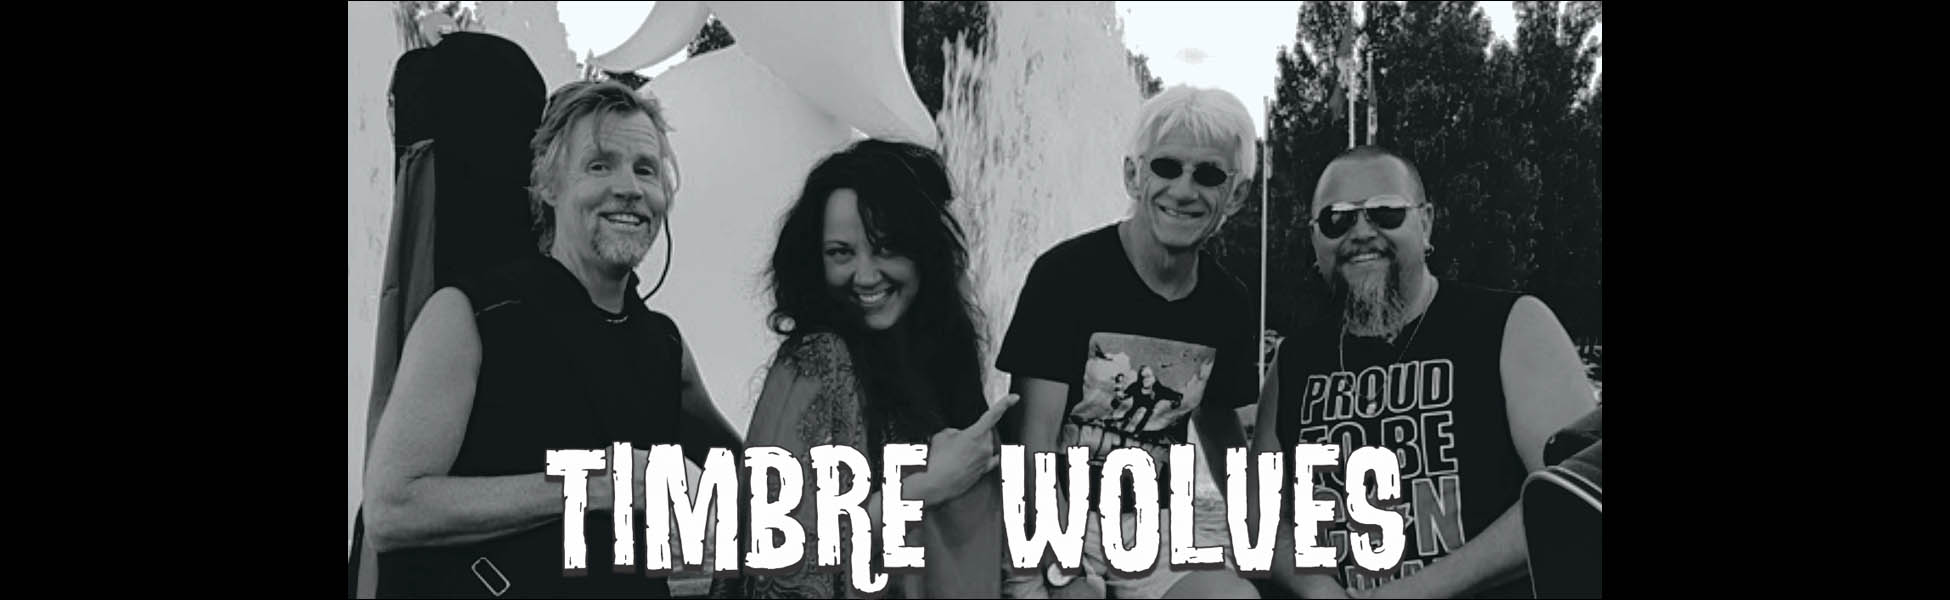 Timber Wolves band